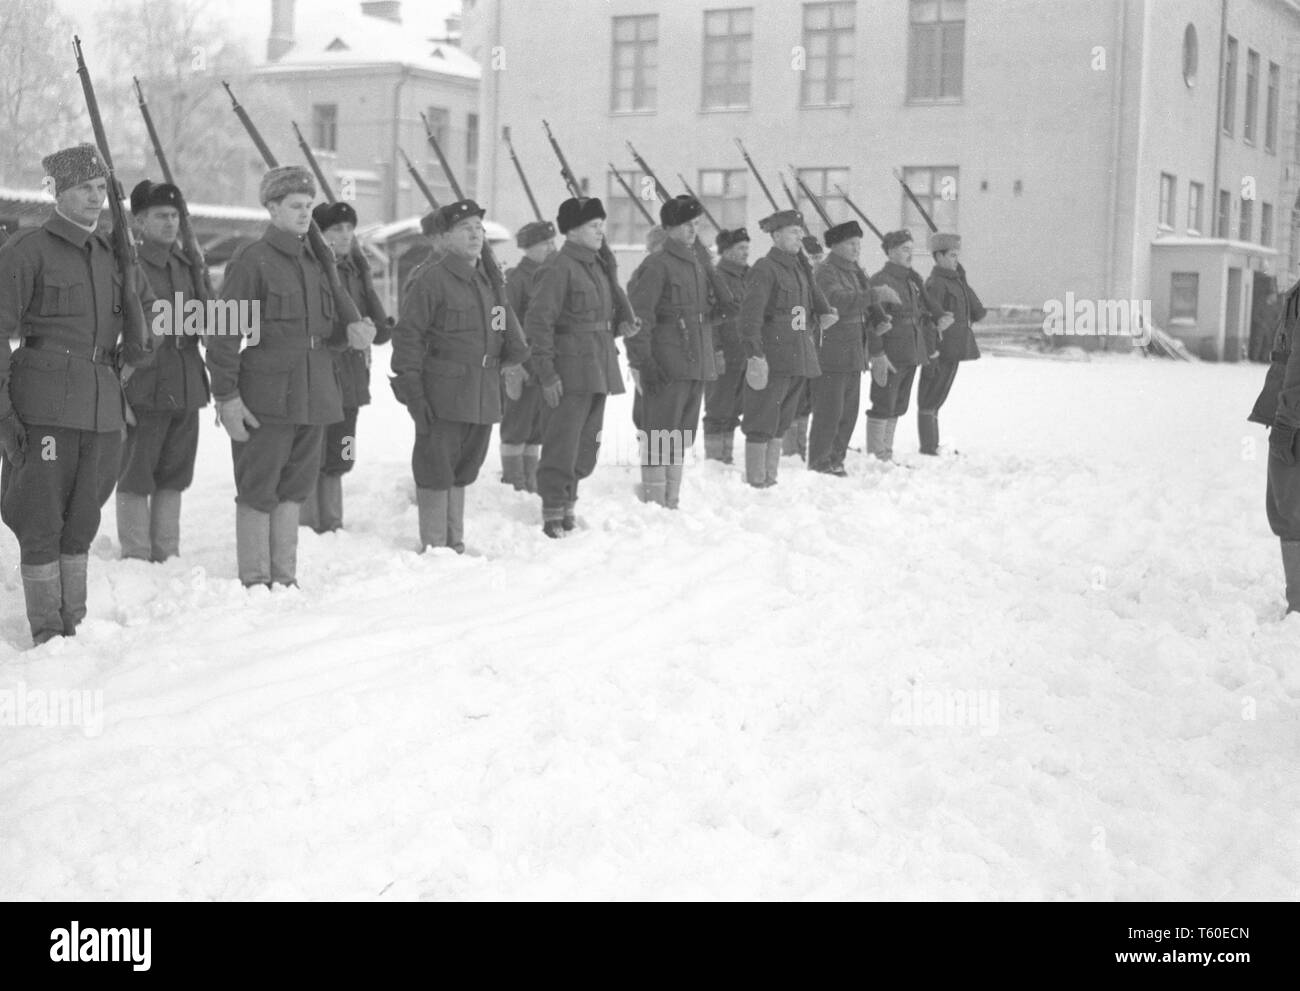 The Winter War. A military conflict between the Soviet union and Finland. It began with a Soviet invasion on november 1939 when Soviet infantery crossed the border on the Karelian Isthmus.   Pictured Canadian voluntary soldiers. January 1940. Photo Kristoffersson ref 97-10 Stock Photo